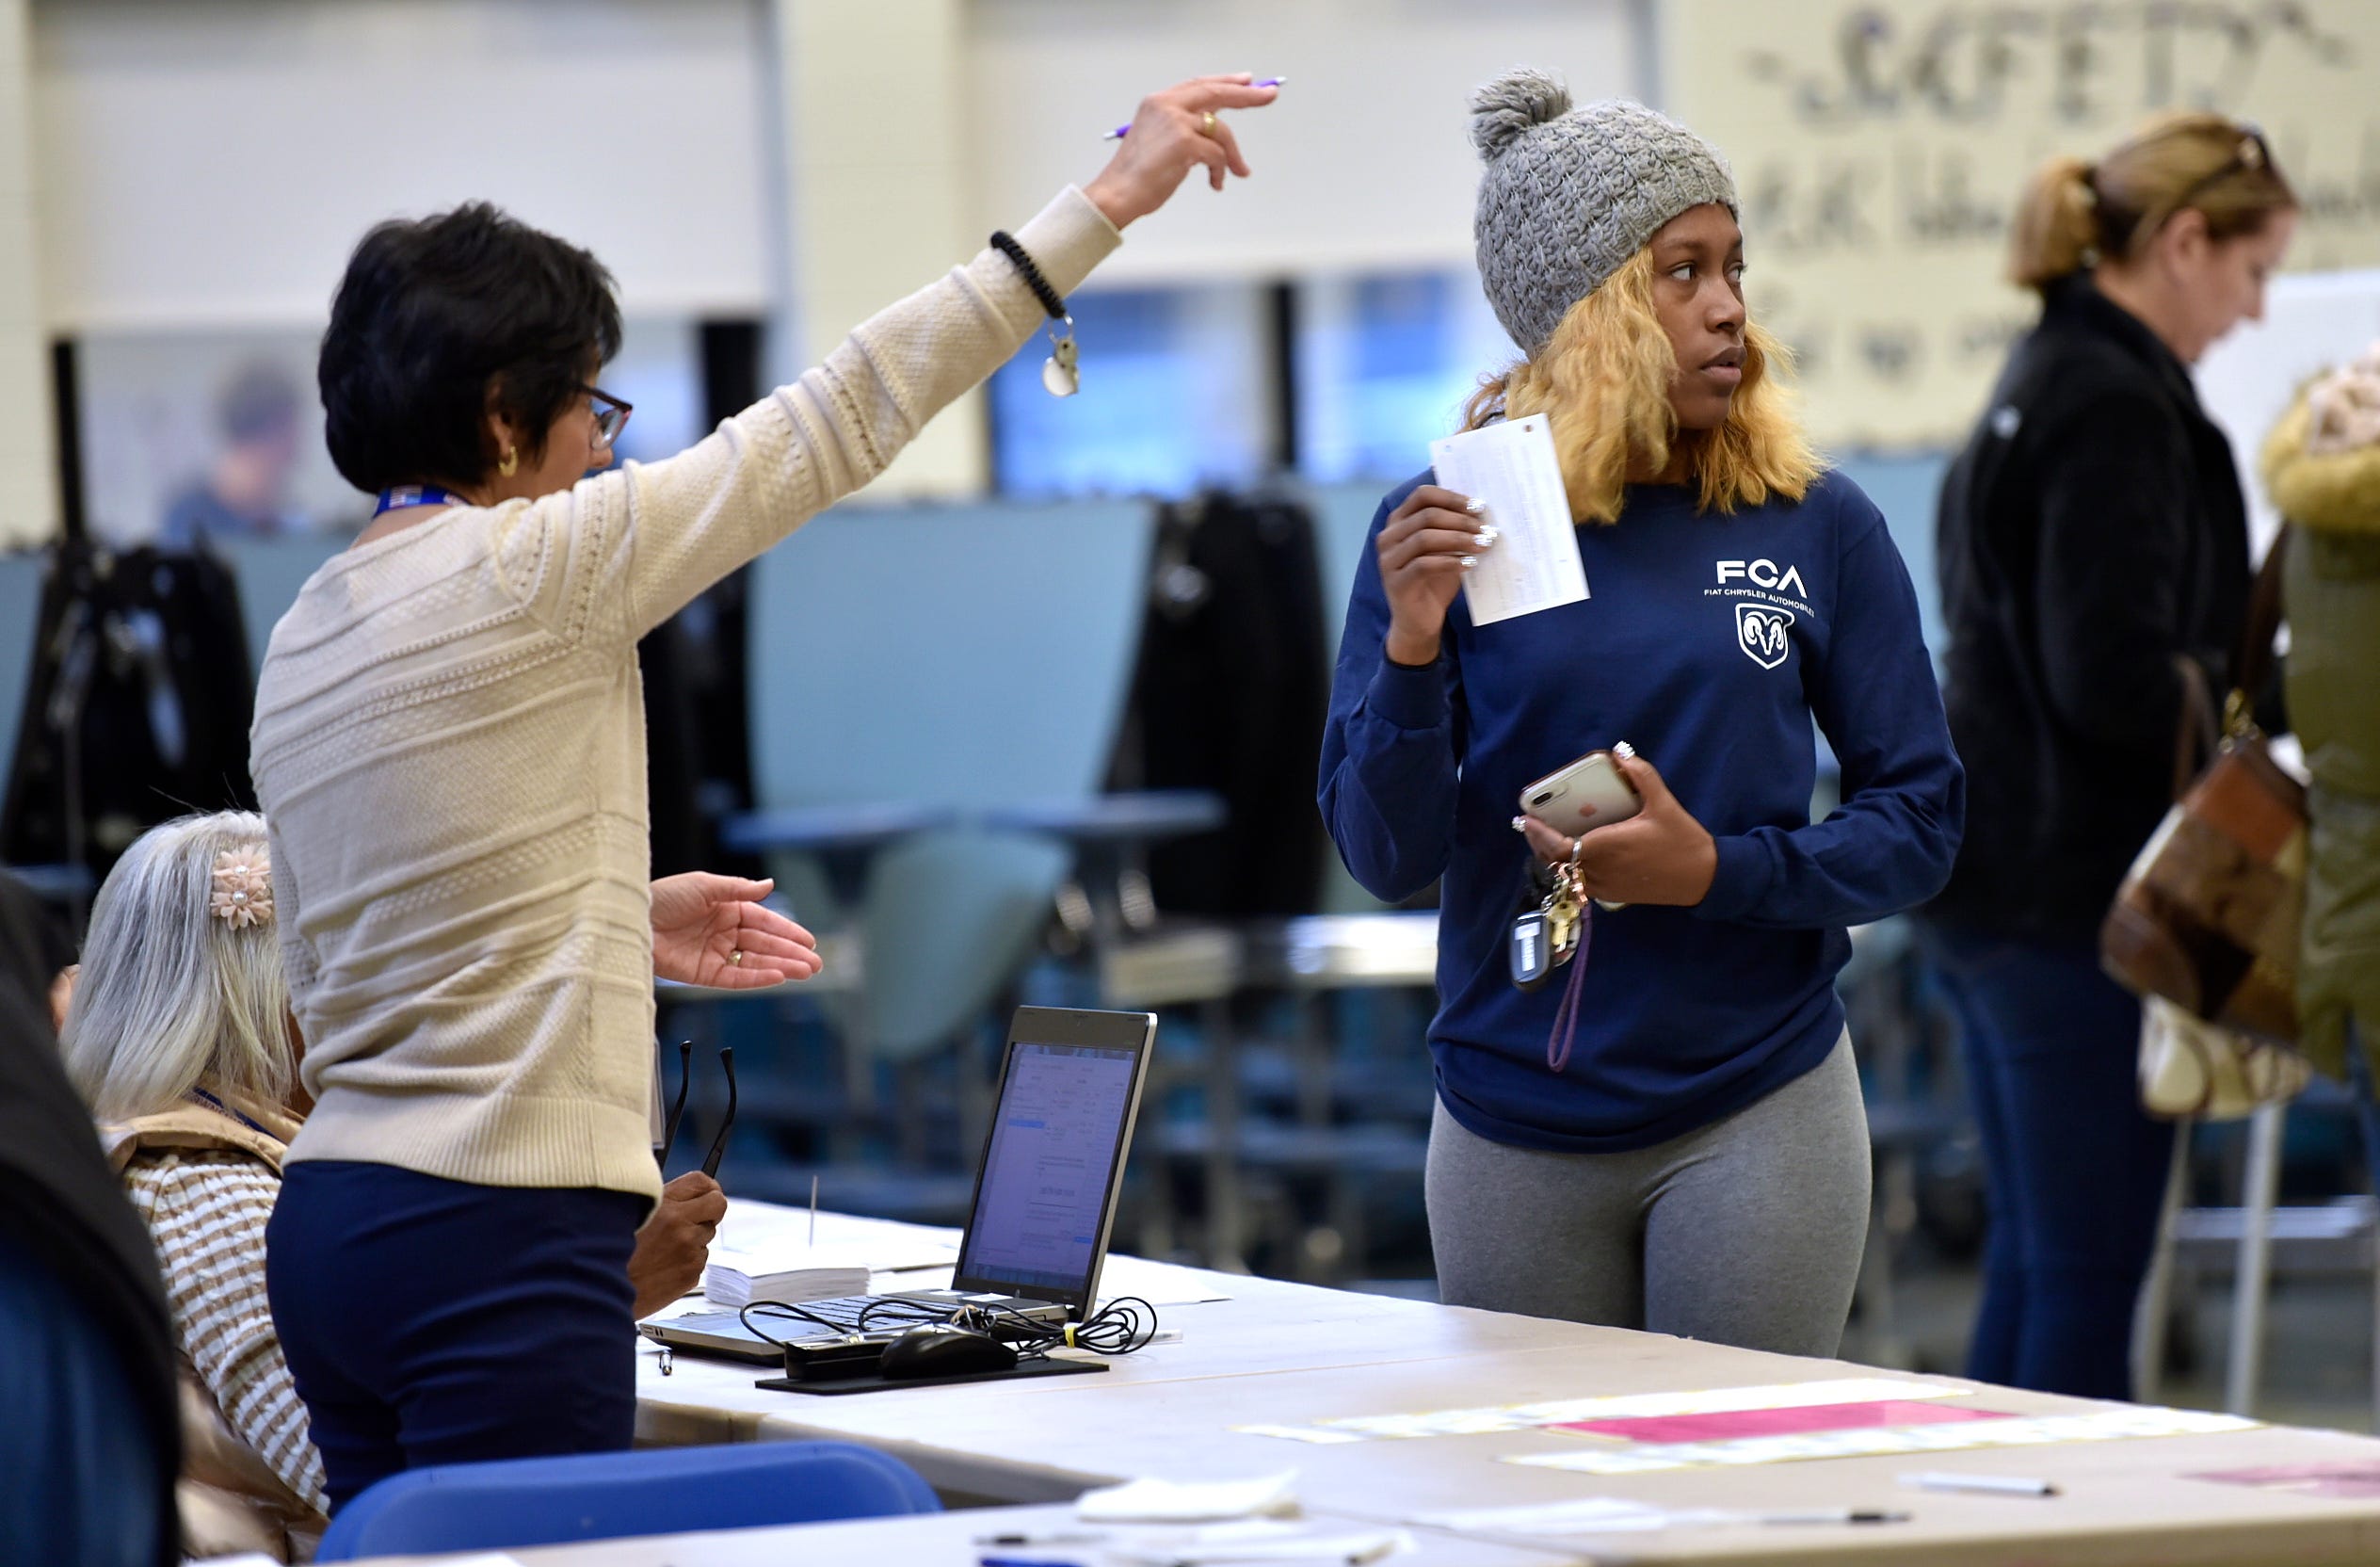 A precinct worker instructs Samara Brame, right, of Macomb Township where to get her ballot in the cafeteria at Ojibwa Elementary School. Brame is a UAW Local 140 member who builds Fiat Chrysler automobiles.